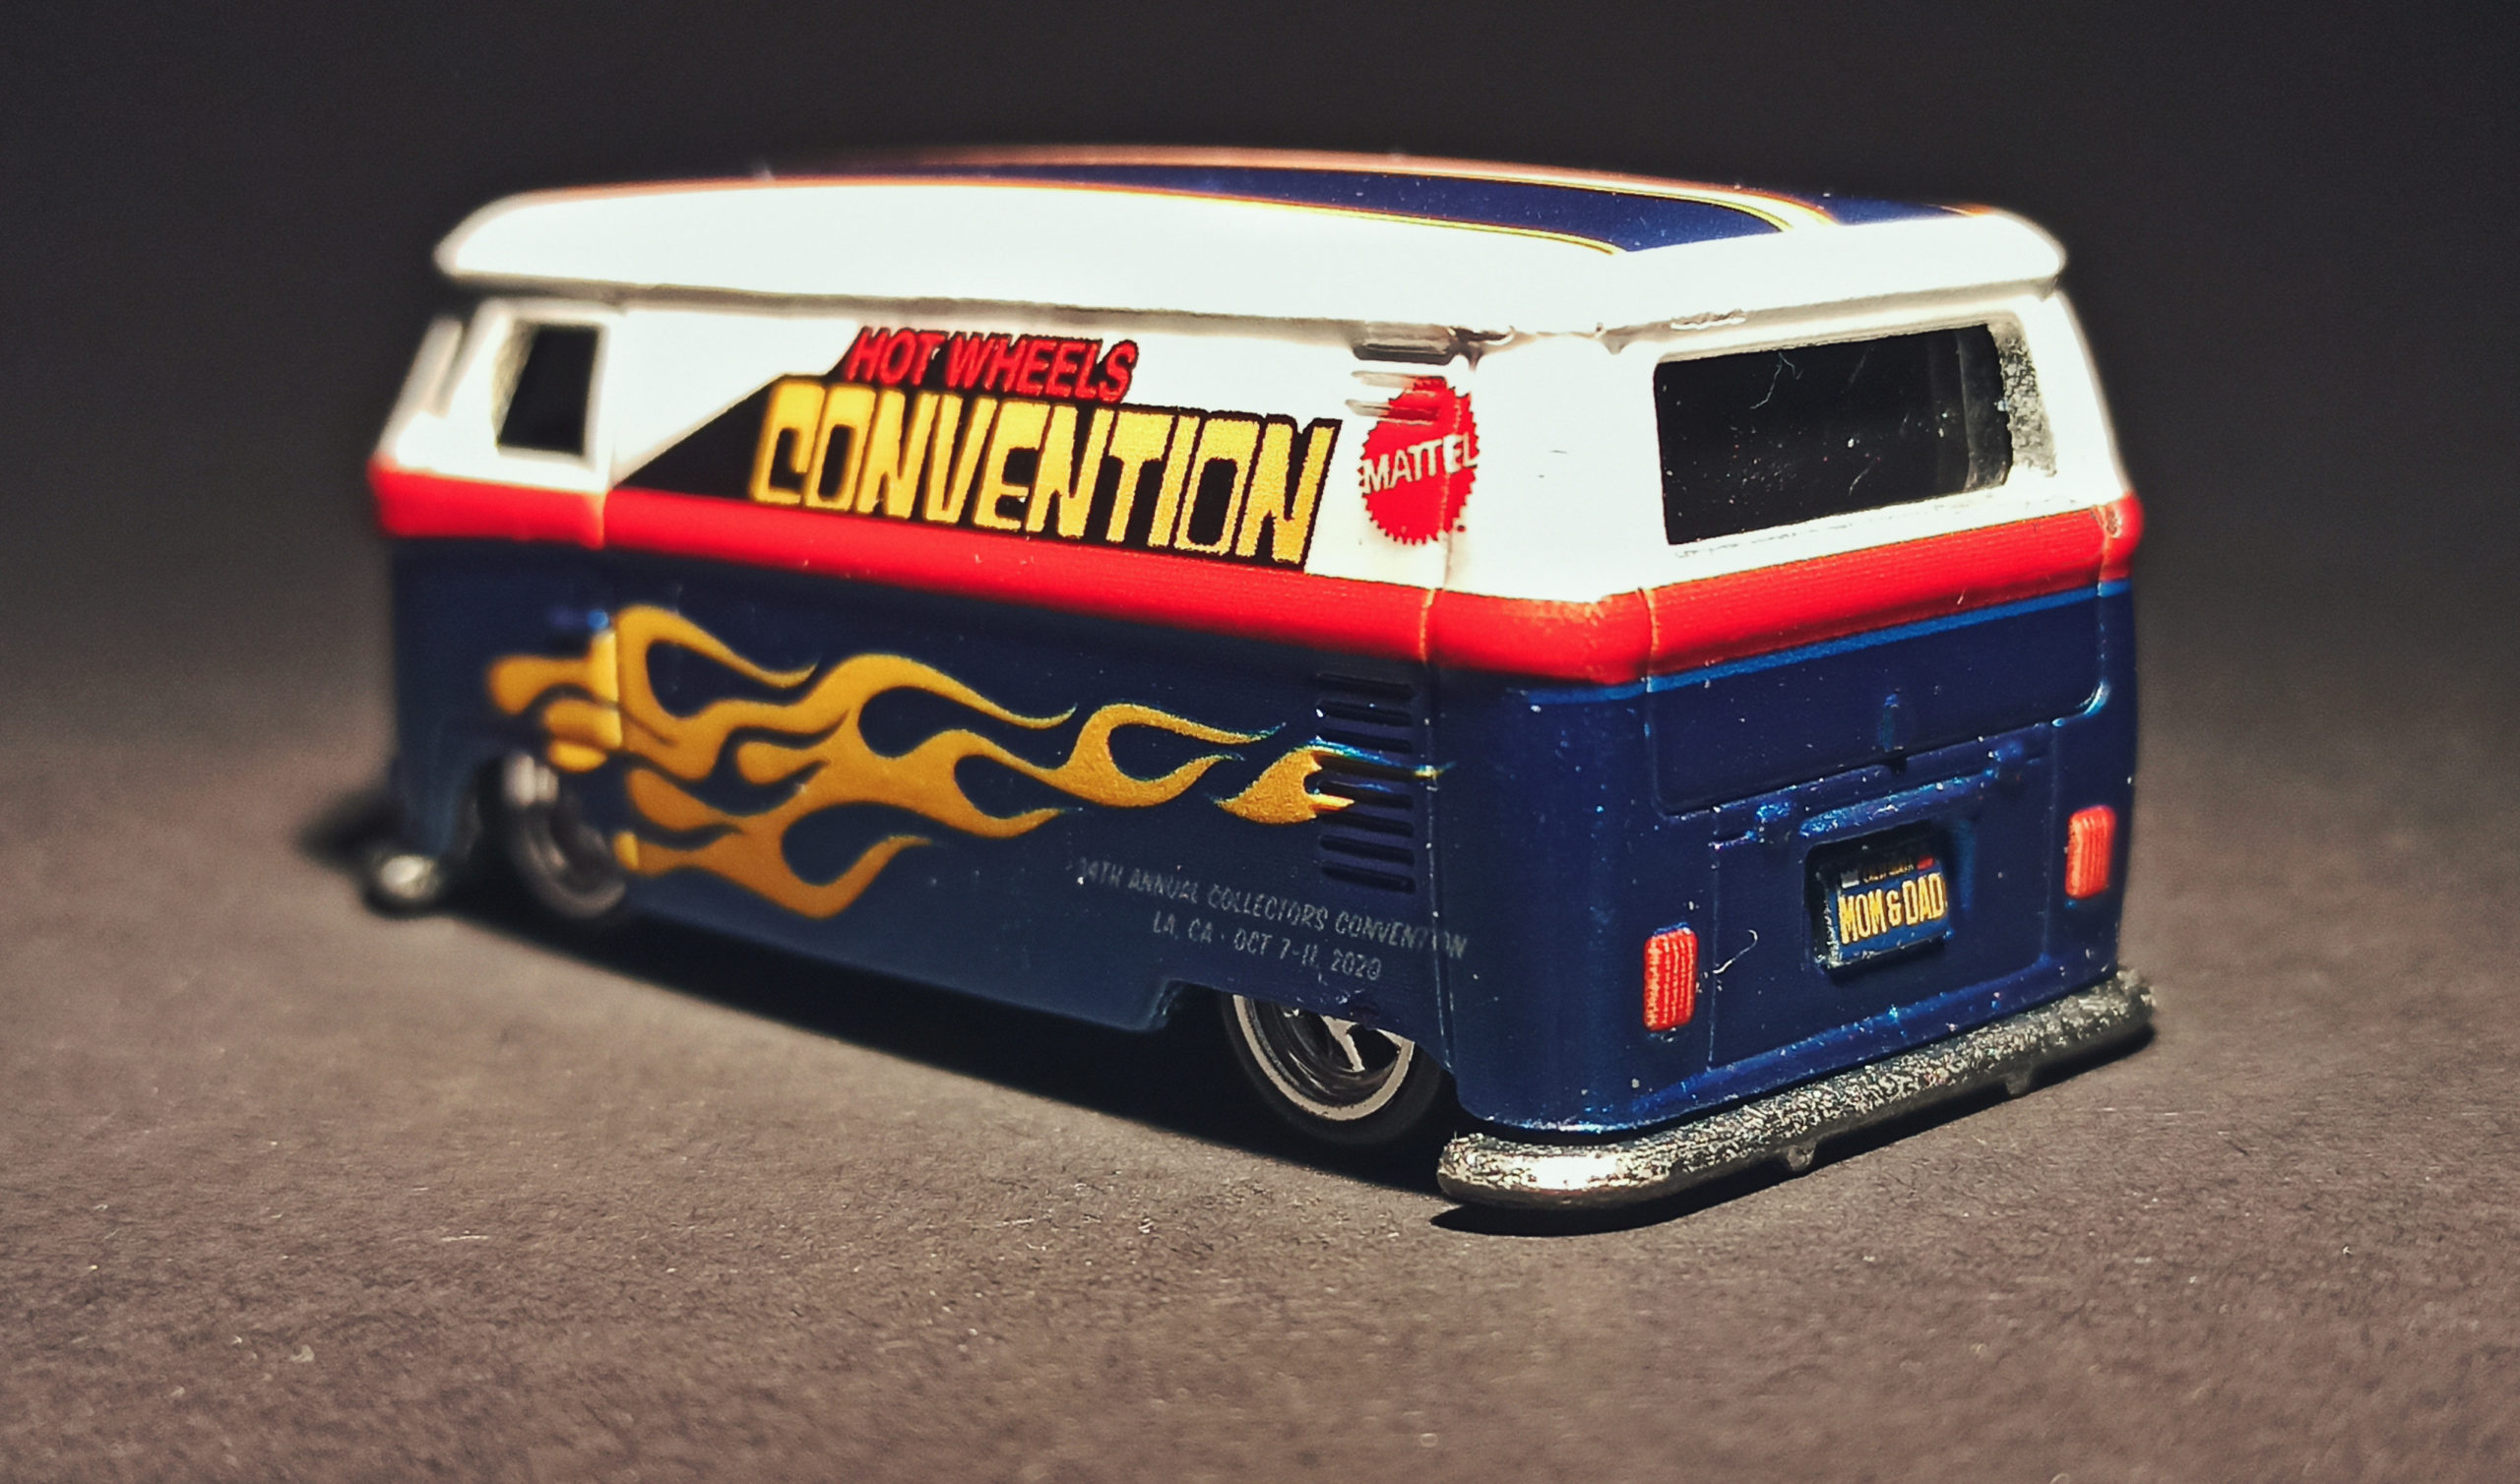 Hot Wheels Volkswagen T1 Panel Bus VW (GLH80) 2020 34th Annual Collectors Convention (3/3) (1 of 4.500) blue & white